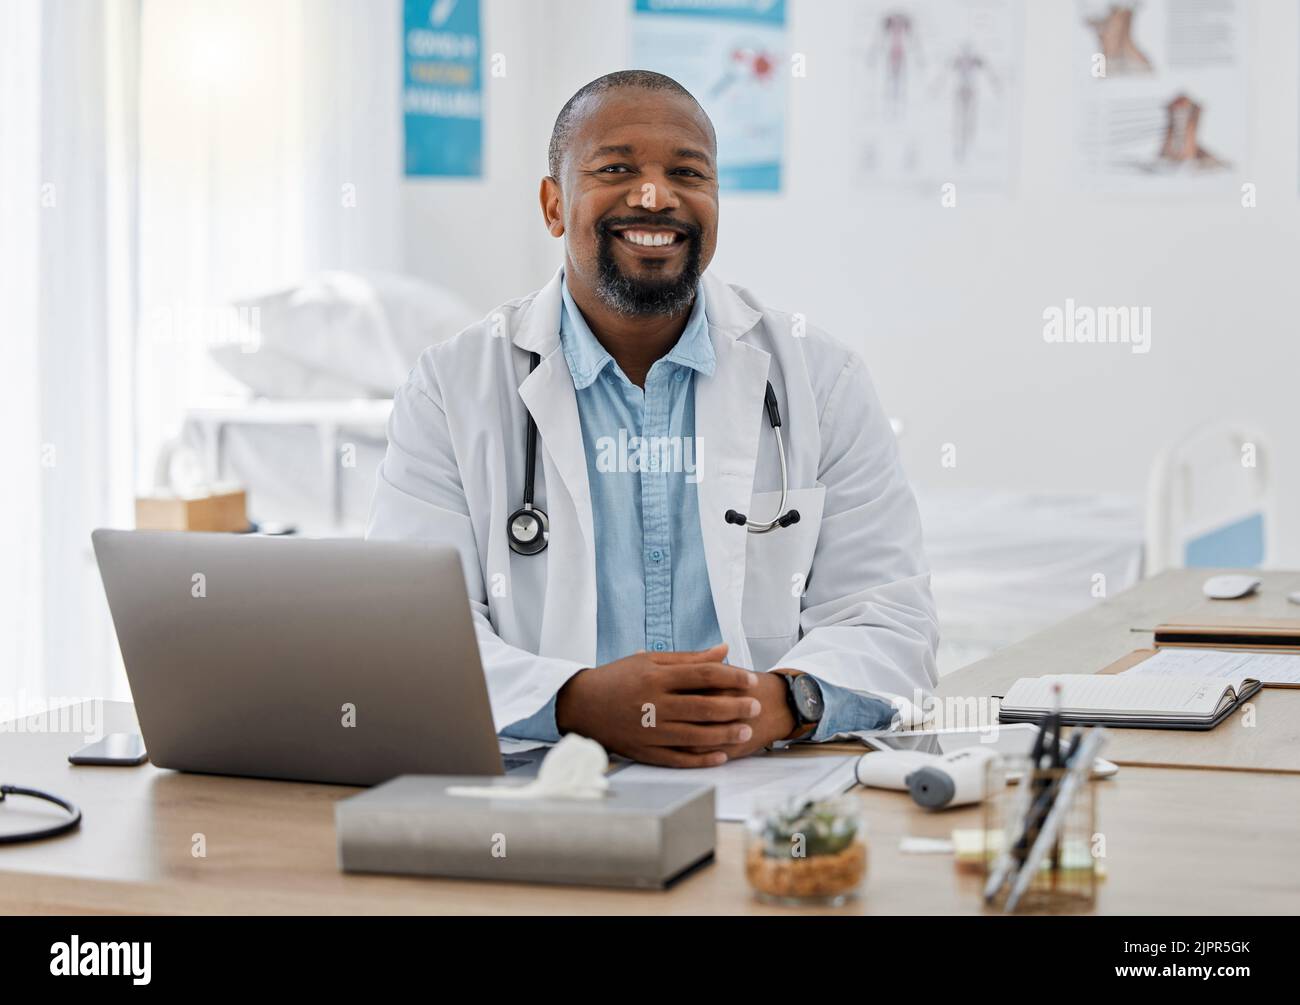 Doctor, medical healthcare worker and male physician at hospital or clinic working with stethoscope and electronics. GP man on laptop reading emails Stock Photo